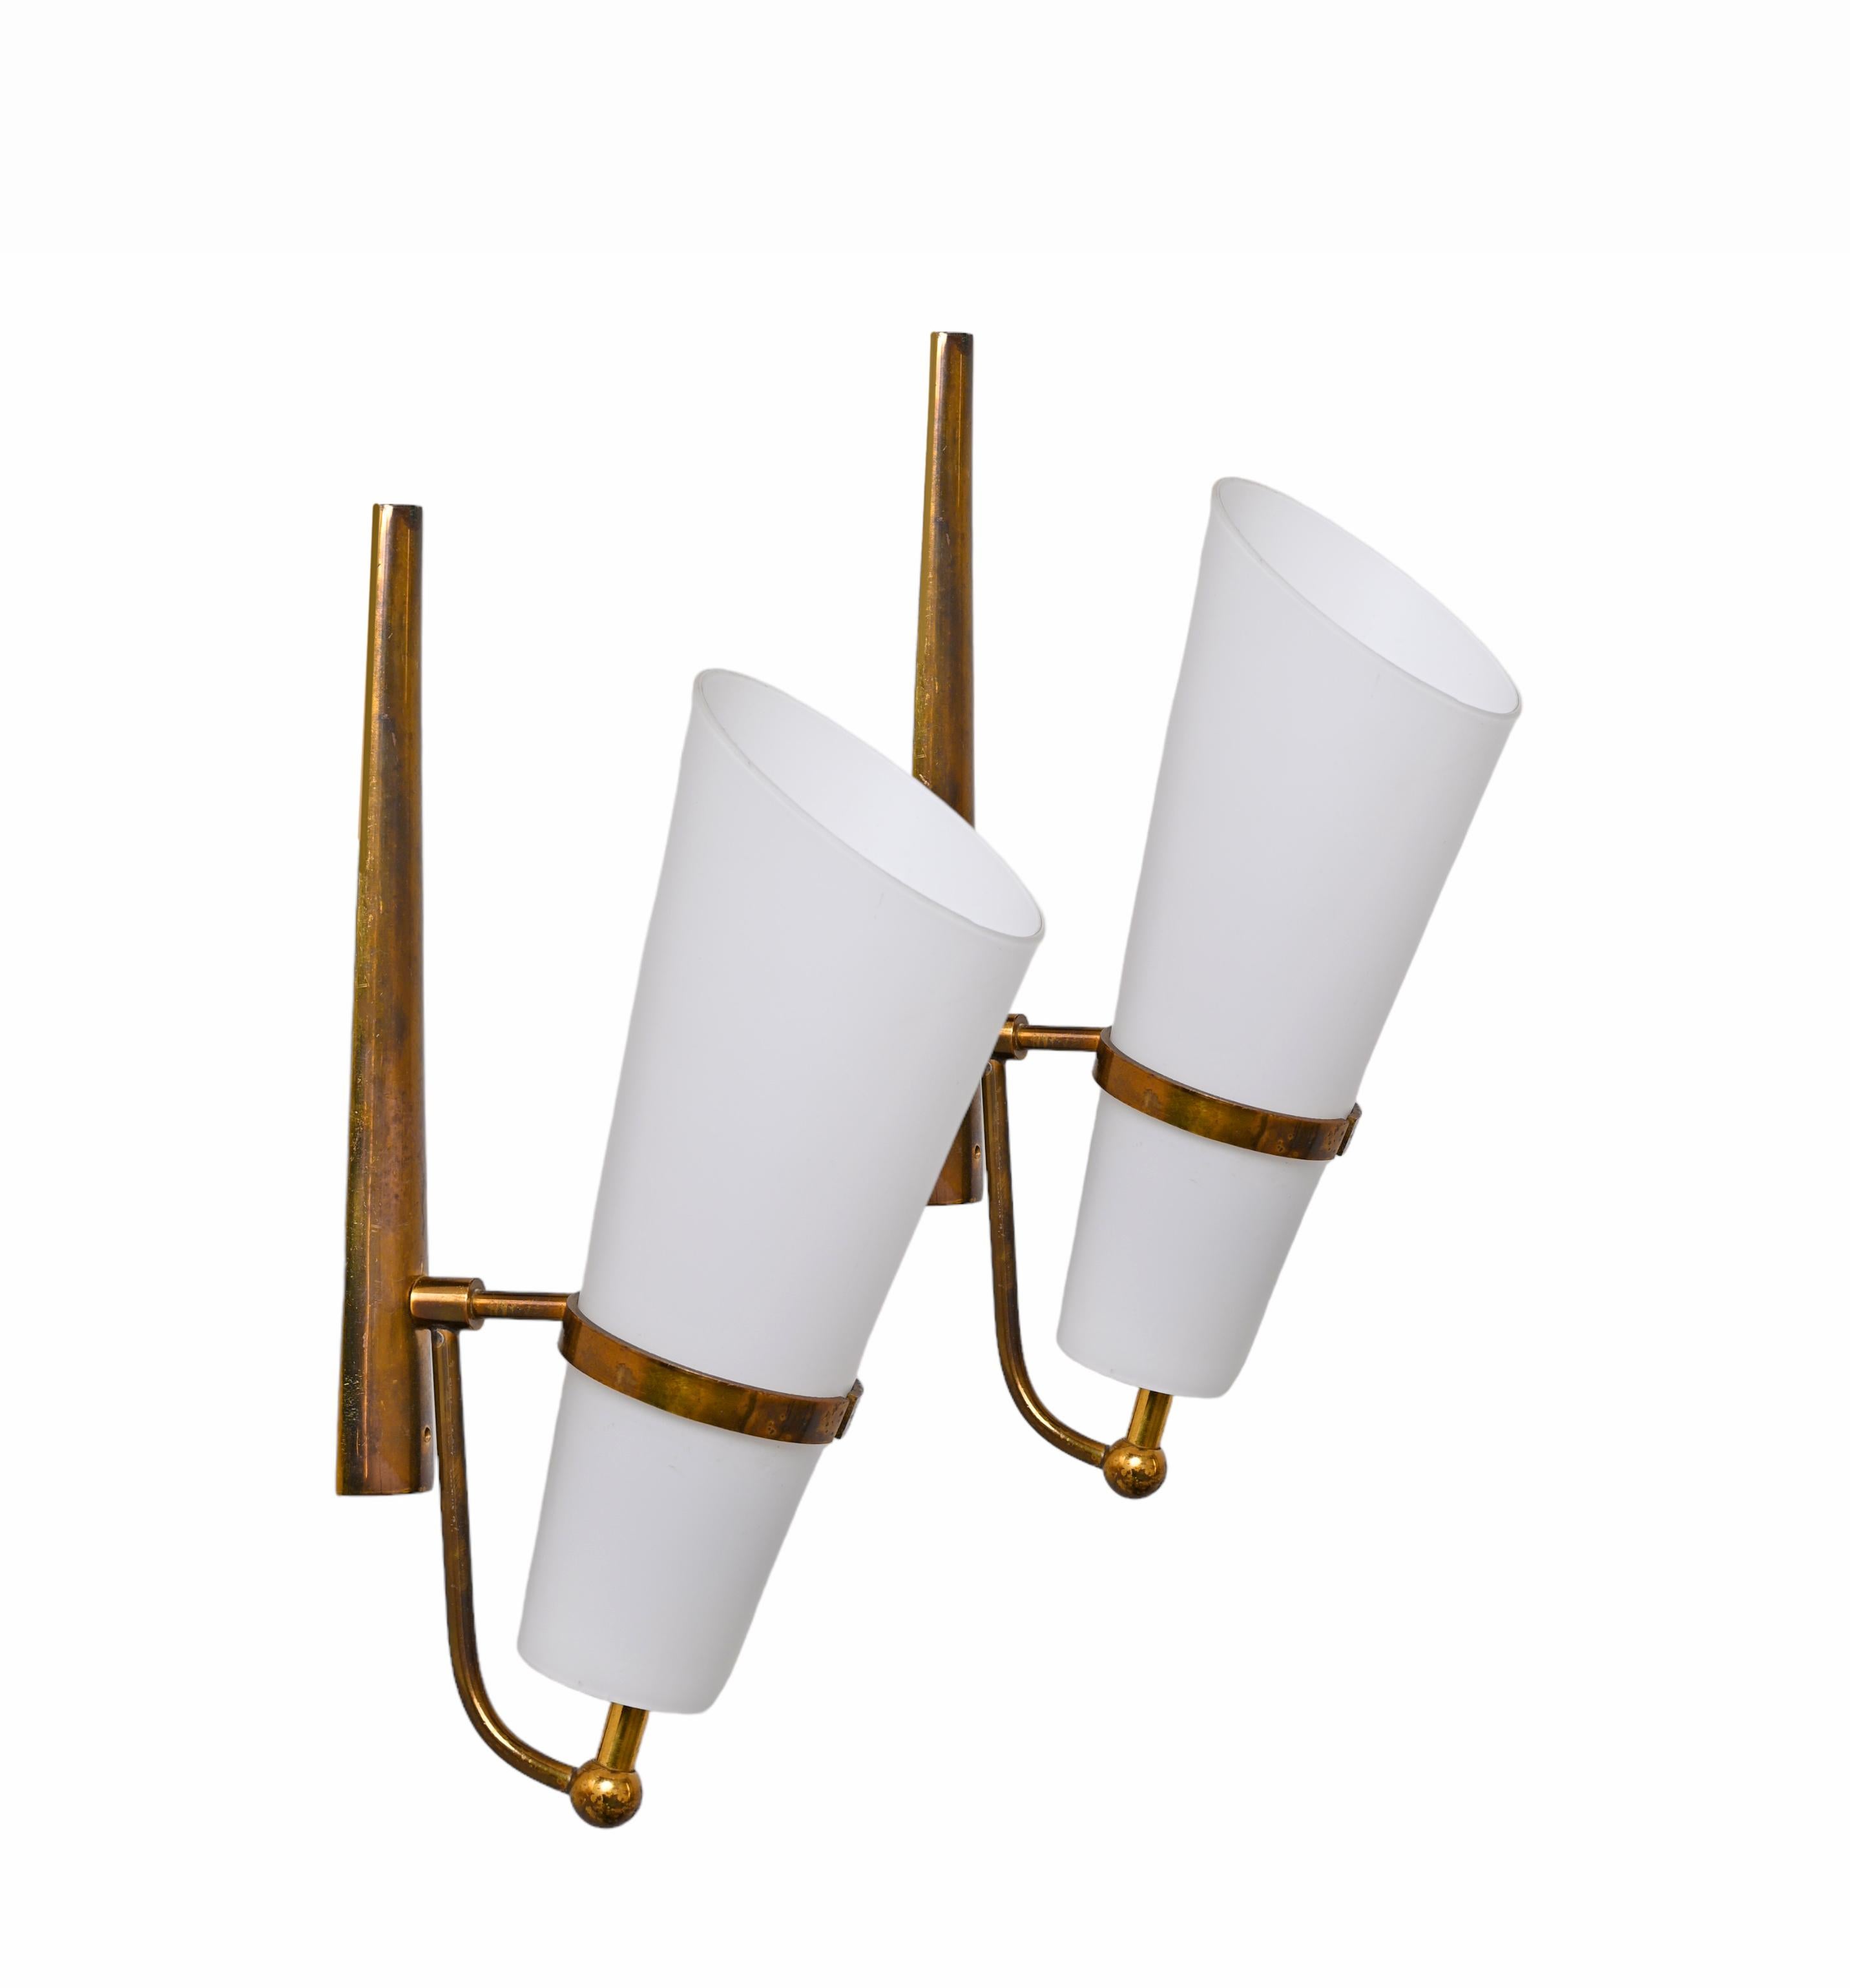 Fantastic pair of of opaline glass and brass sconces. These elegant wall lamps were designed in Italy in the 1950s and are attributed to Stilnovo. 

The sconces consist of a beautiful conic opaline glass and a brass structure, that has been kept